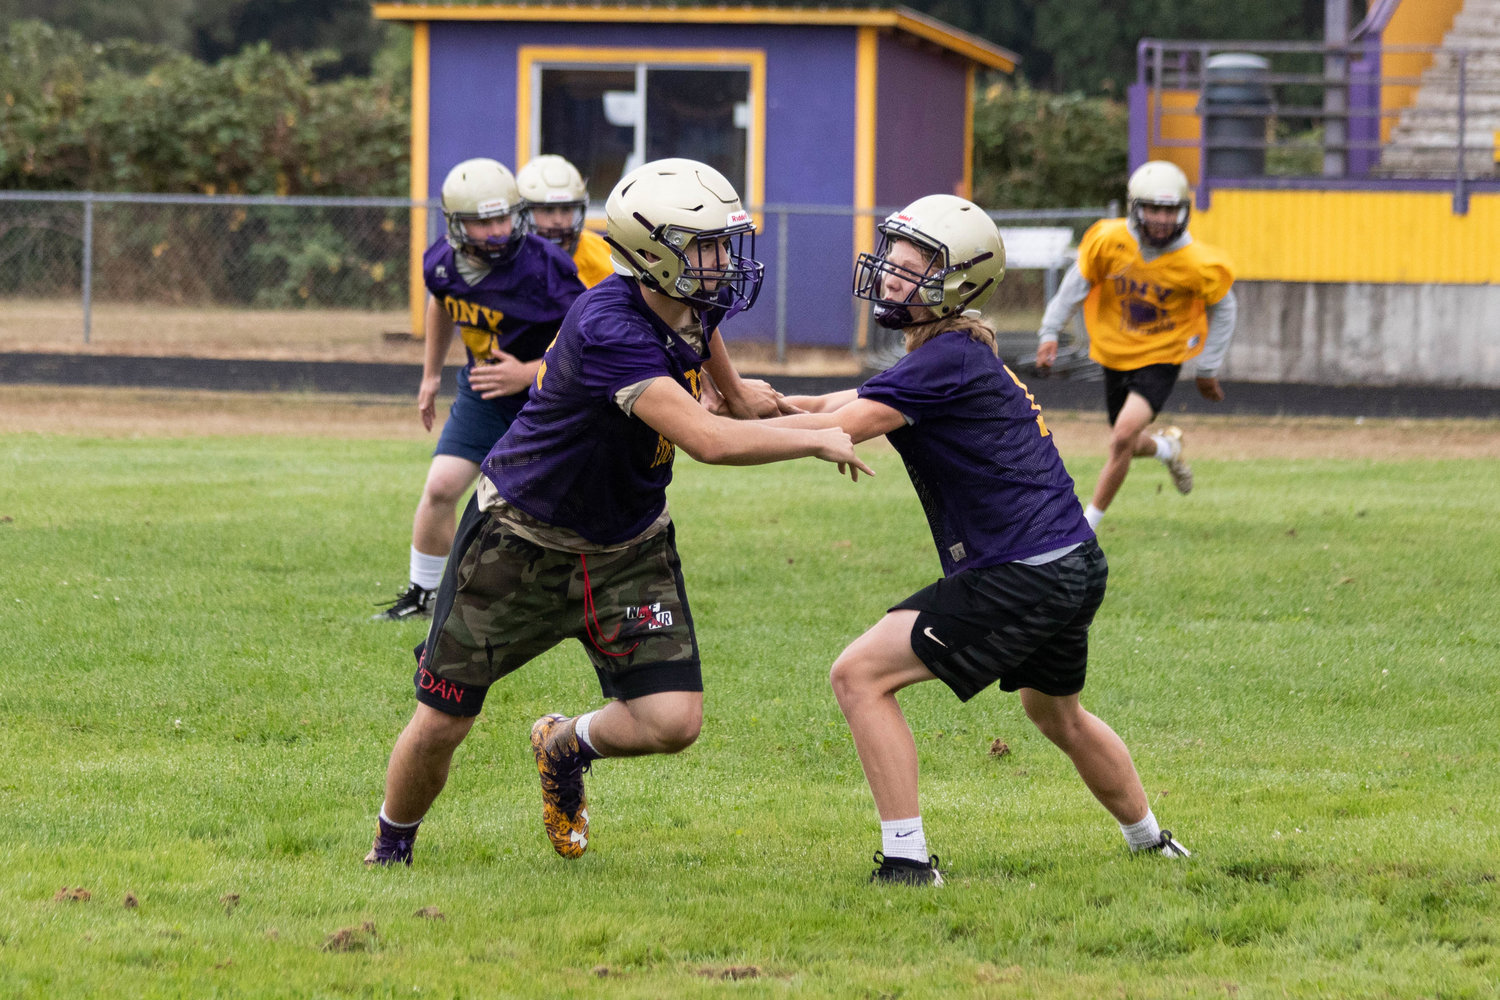 Fullback/linebacker Marshall Haight pursues the ballcarrier in a drill at Onalaska's first practice of the fall season Wednesday morning.